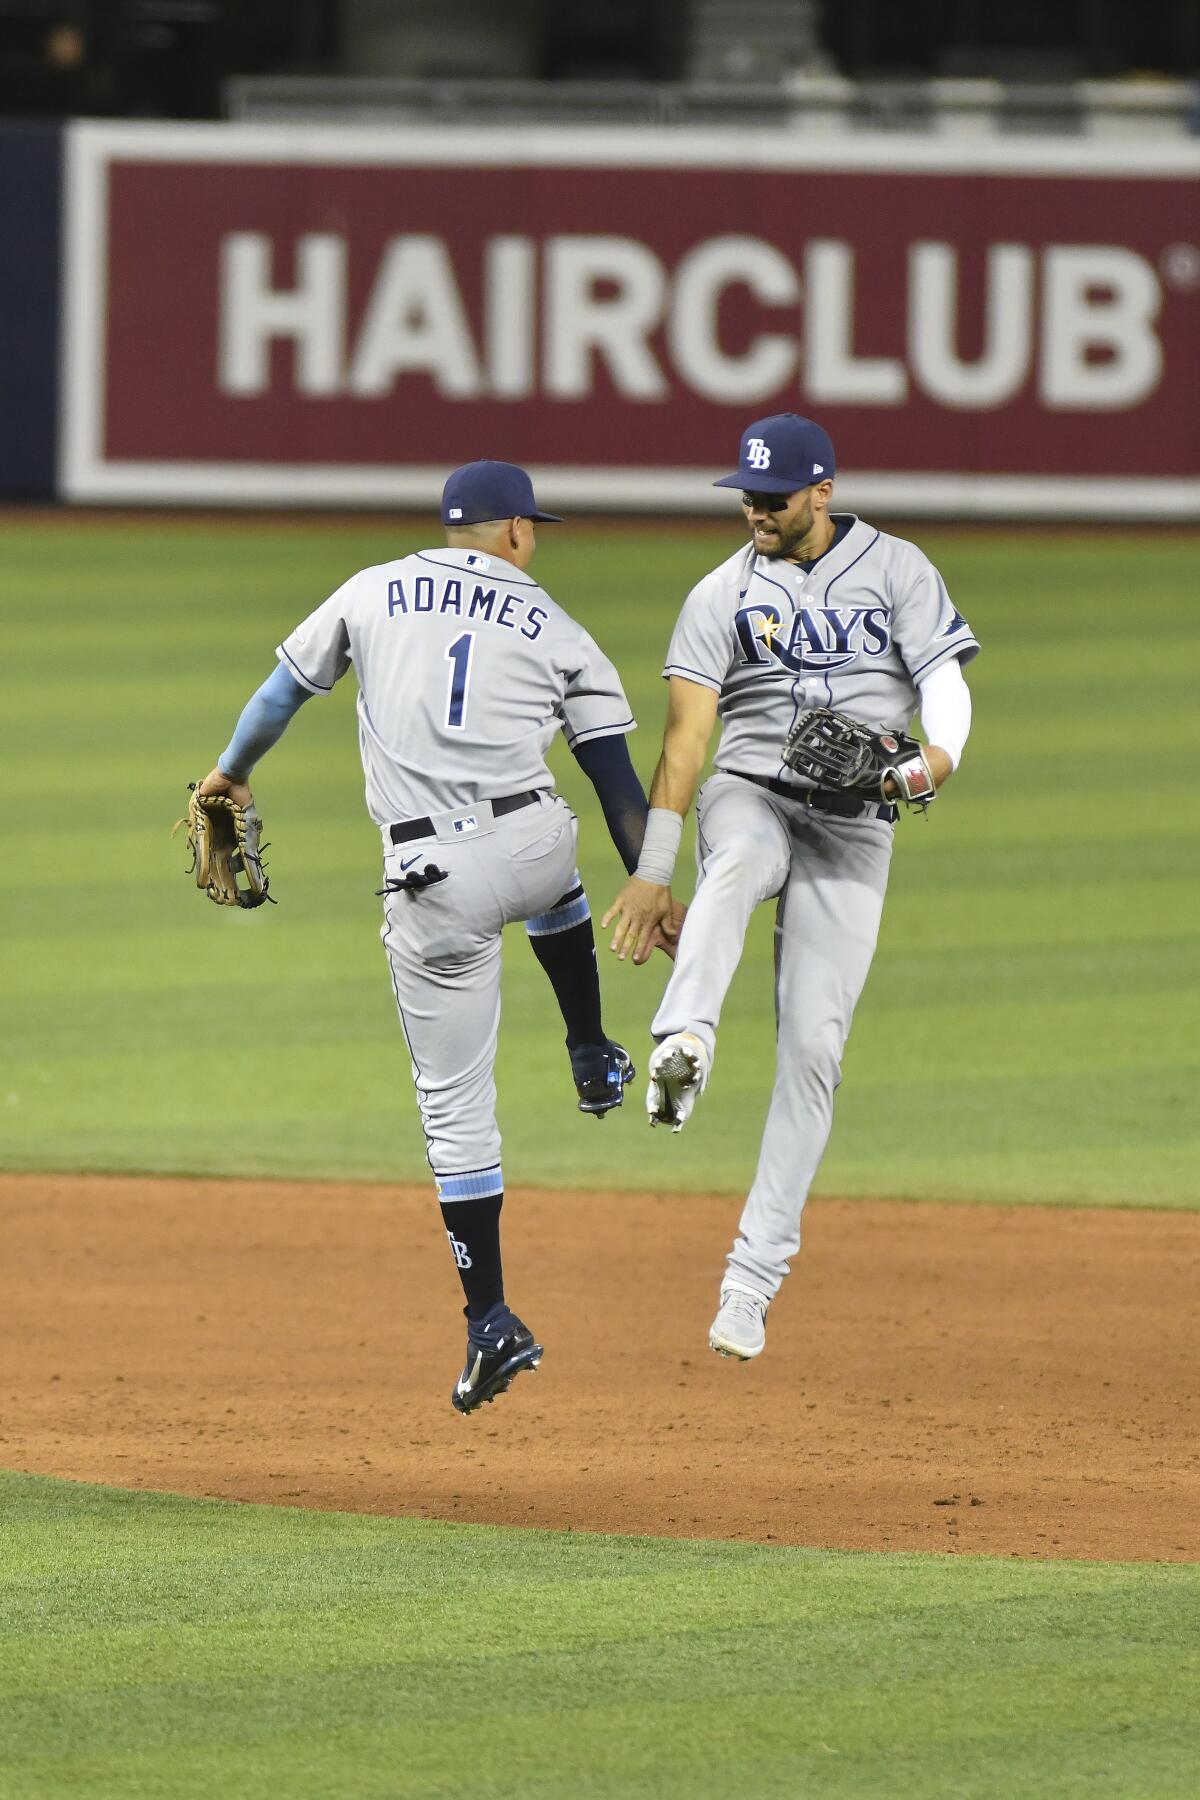 Tampa Bay Rays shortstop Willy Adames, left, and center fielder Kevin Kiermaier celebrate after defeating the Miami Marlins in a baseball game Friday, April 2, 2021, in Miami. (AP Photo/Gaston De Cardenas)